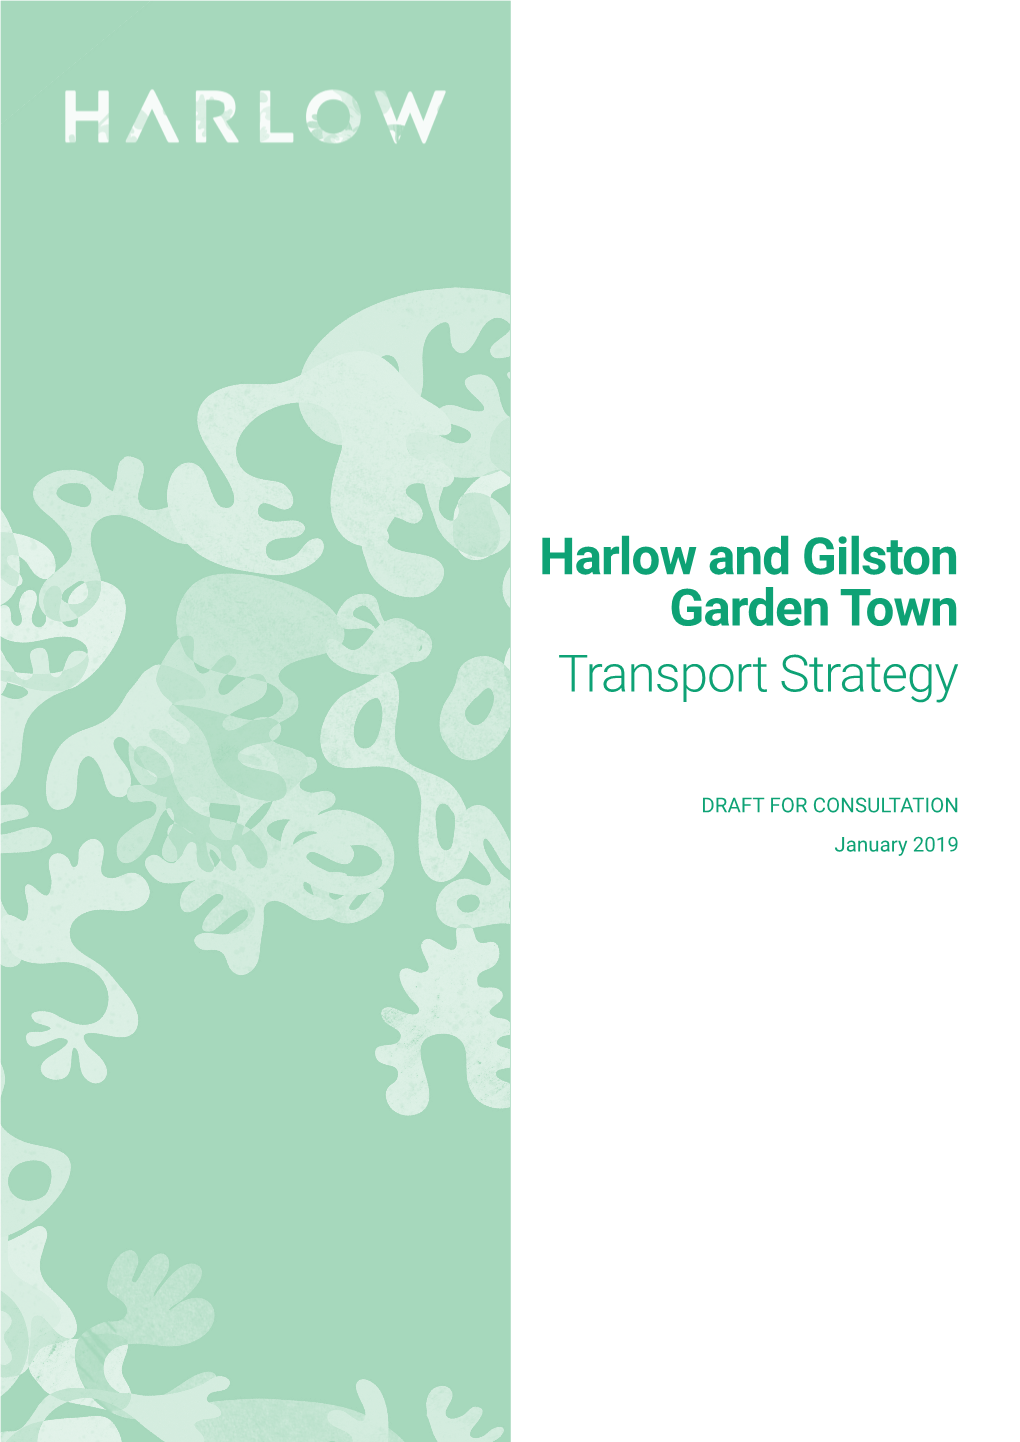 Harlow and Gilston Garden Town Transport Strategy